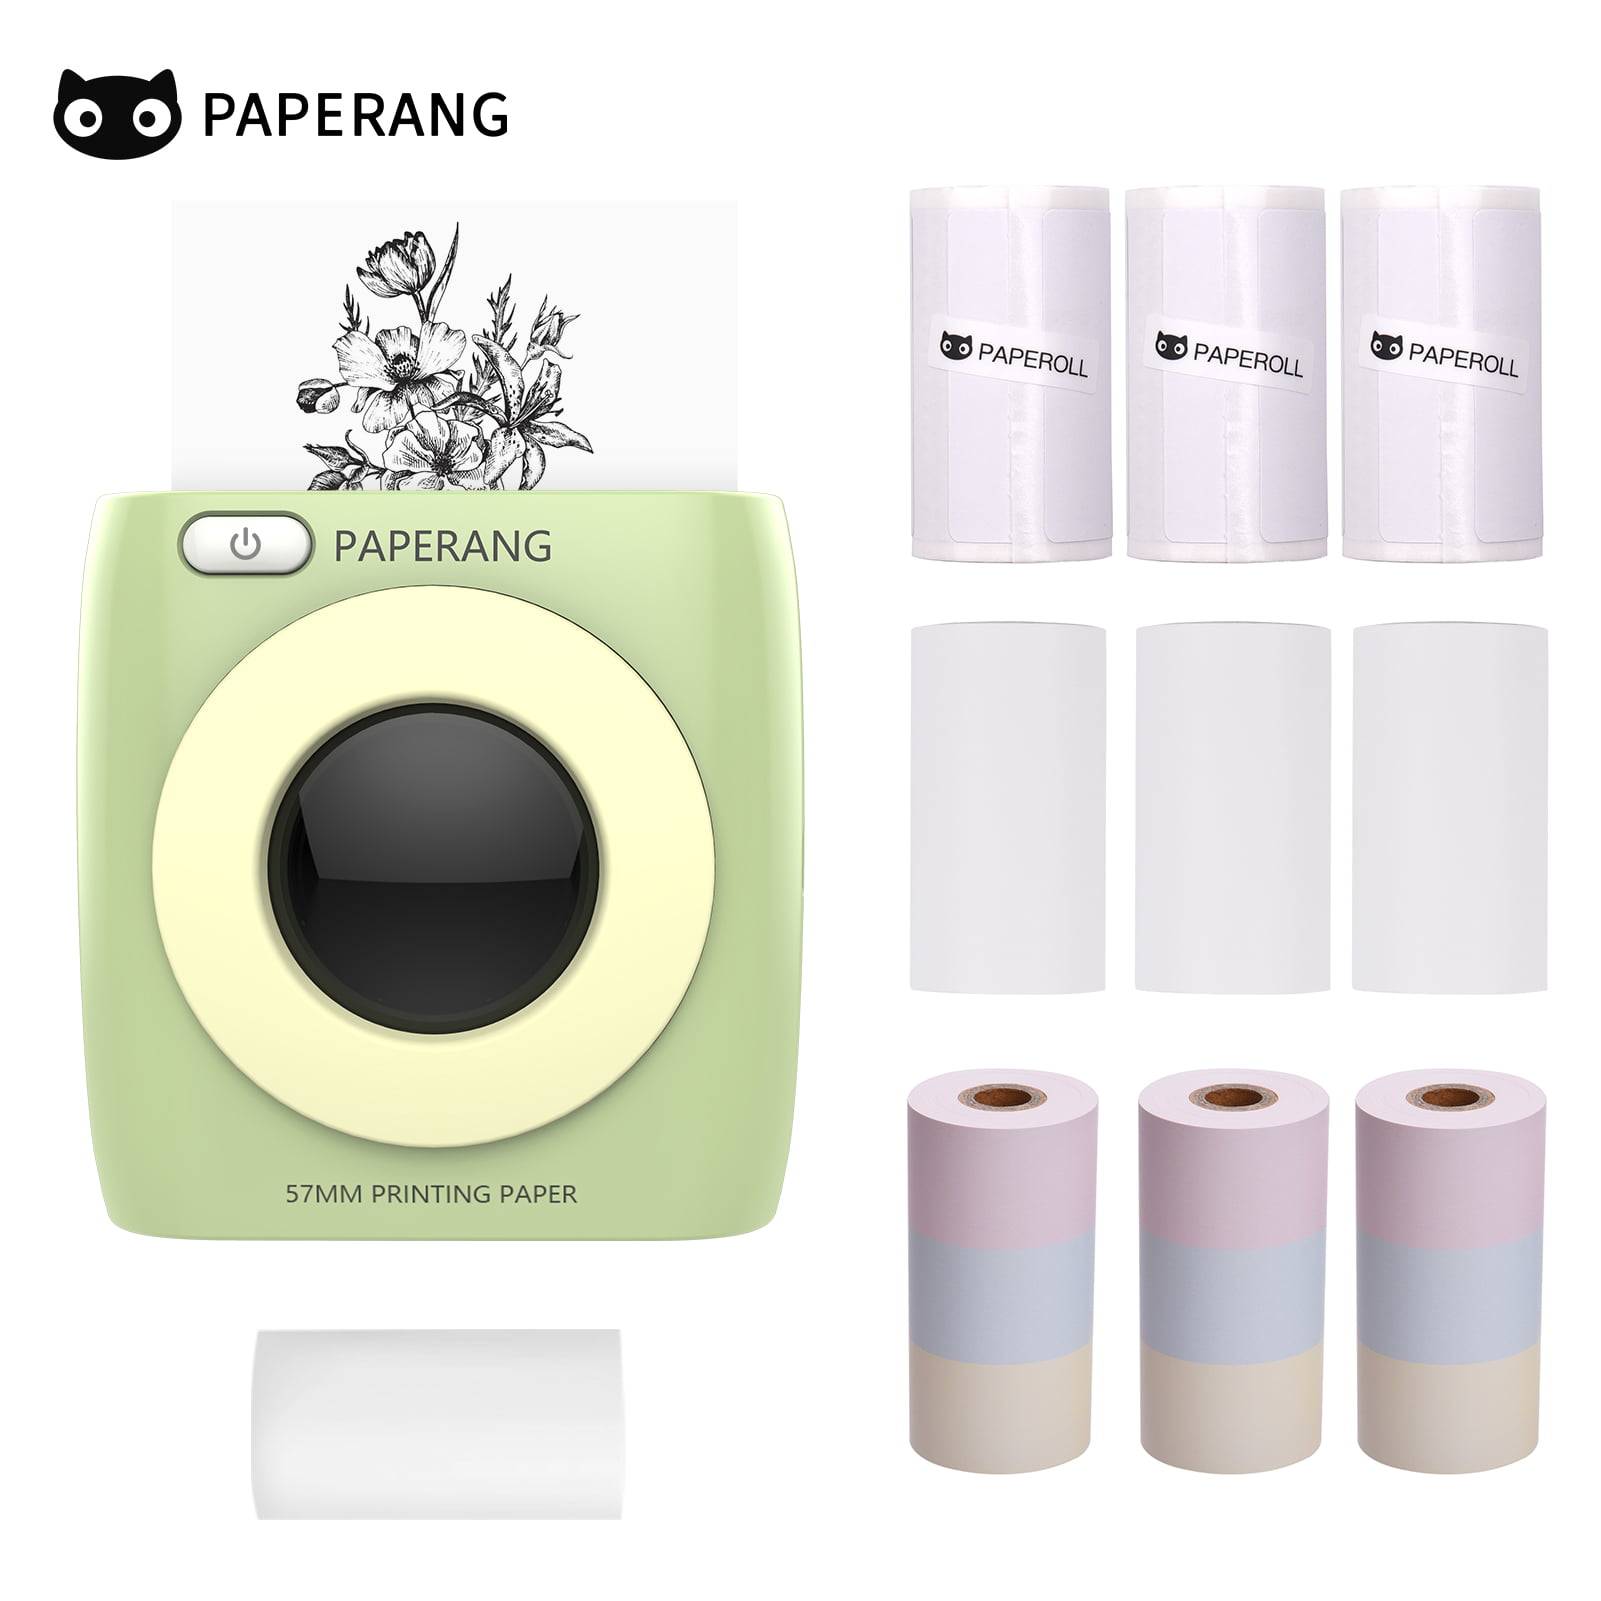 PAPERANG P2S Mini Pocket Wireless BT Thermal Printer Portable Mobile Printer 300dpi for Picture Receipt Label Sticker with Clock Function 7 Rolls Thermal Paper Compatible with Android iOS Windows